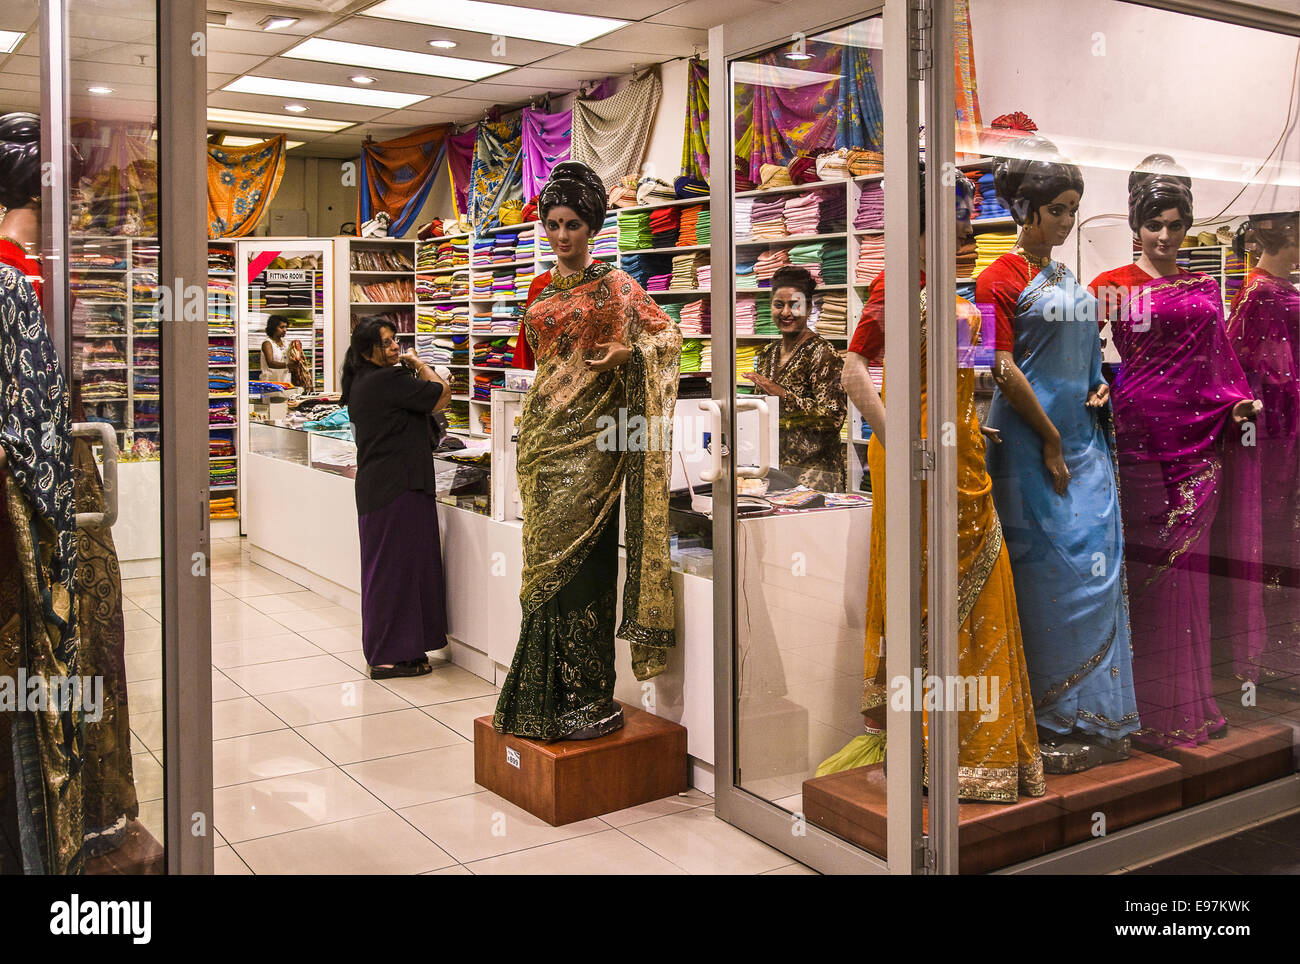 South Africa, Durban, Chats Wort indian quarter, the shopping center Stock Photo